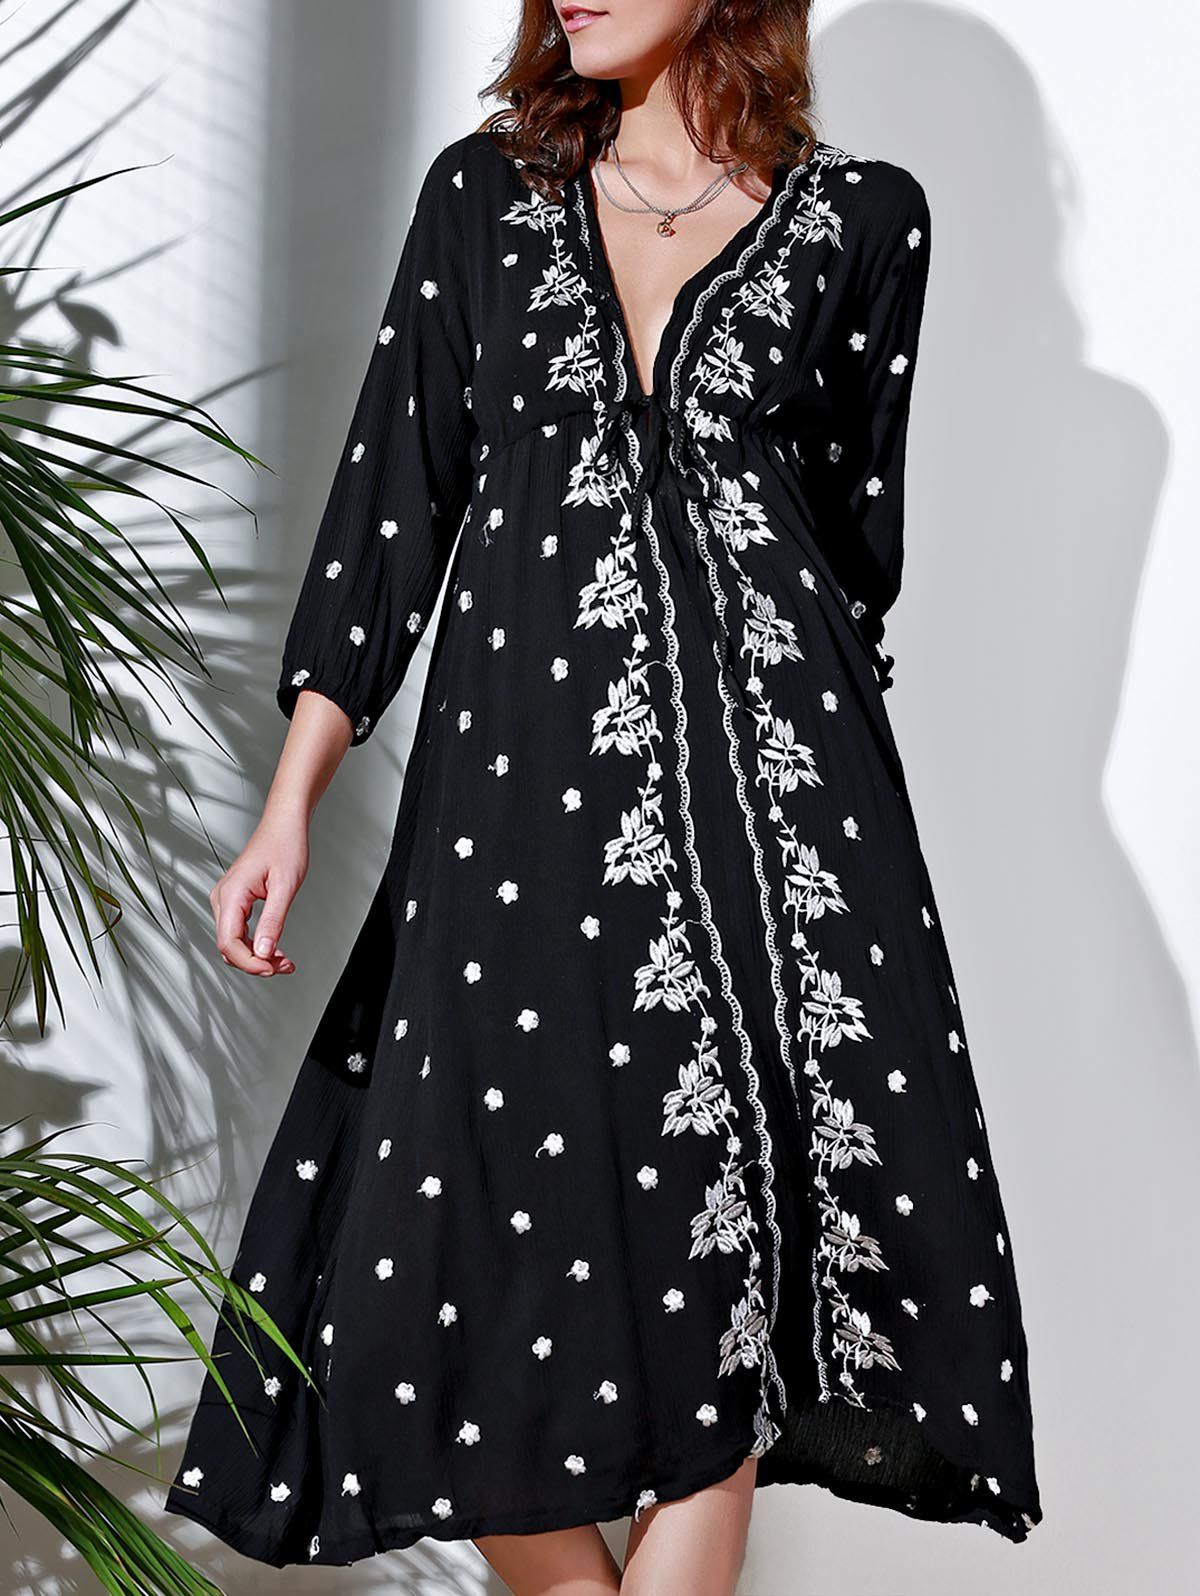 

Refreshing Embroidered Plunging Neck 3/4 Sleeve Midi Dress For Women, Black